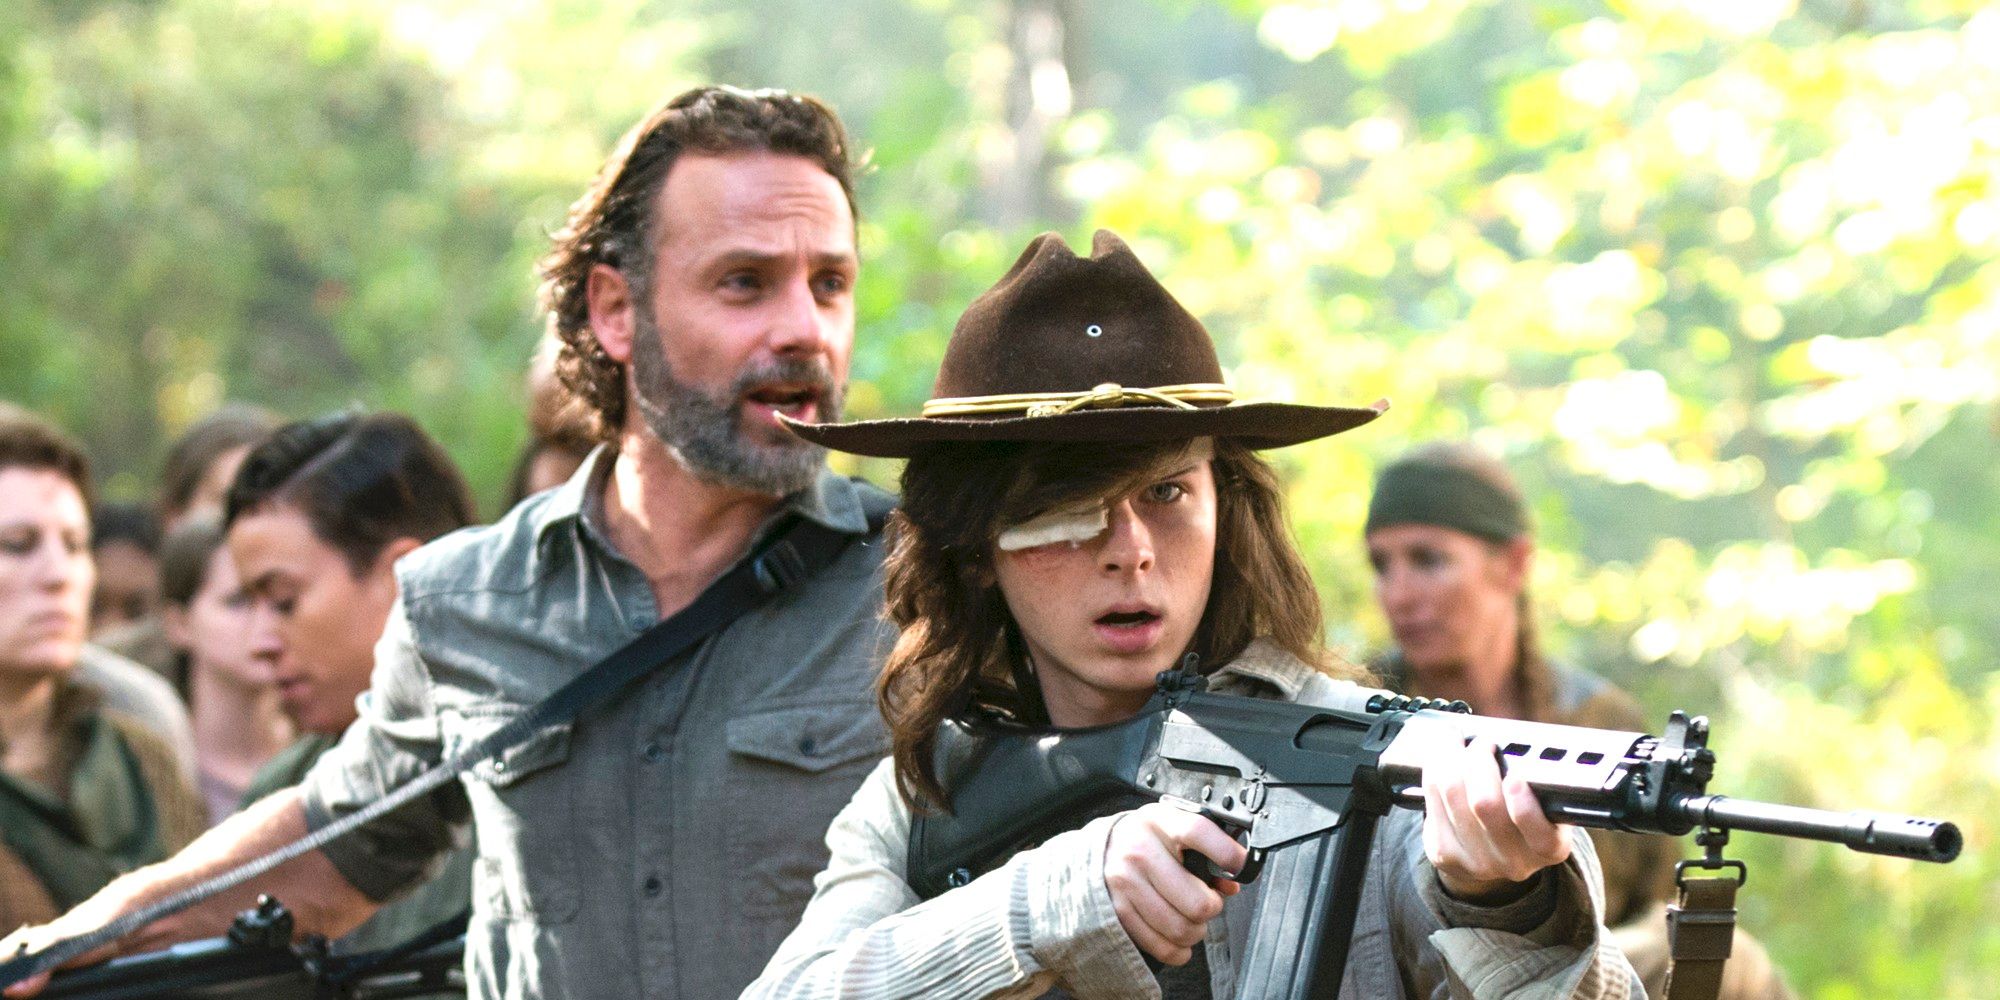 Andrew Lincoln as Rick Grimes, Chandler Riggs as Carl Grimes in The Walking Dead